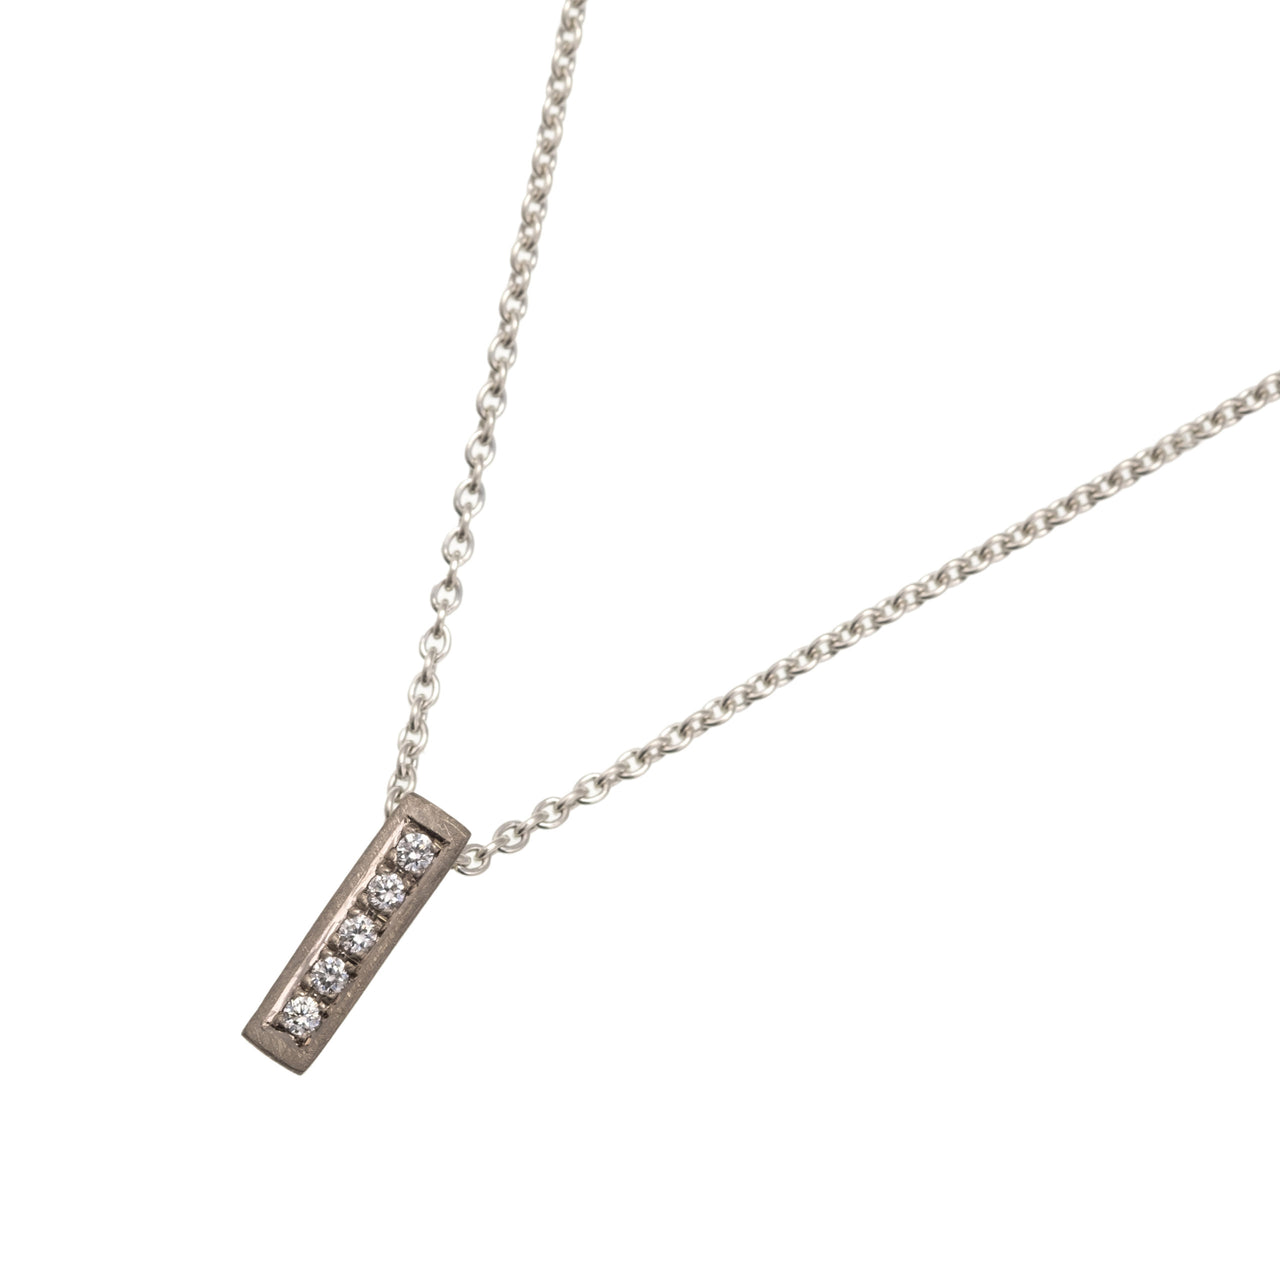 Silver & 18ct White Gold Linea Necklace with Diamonds